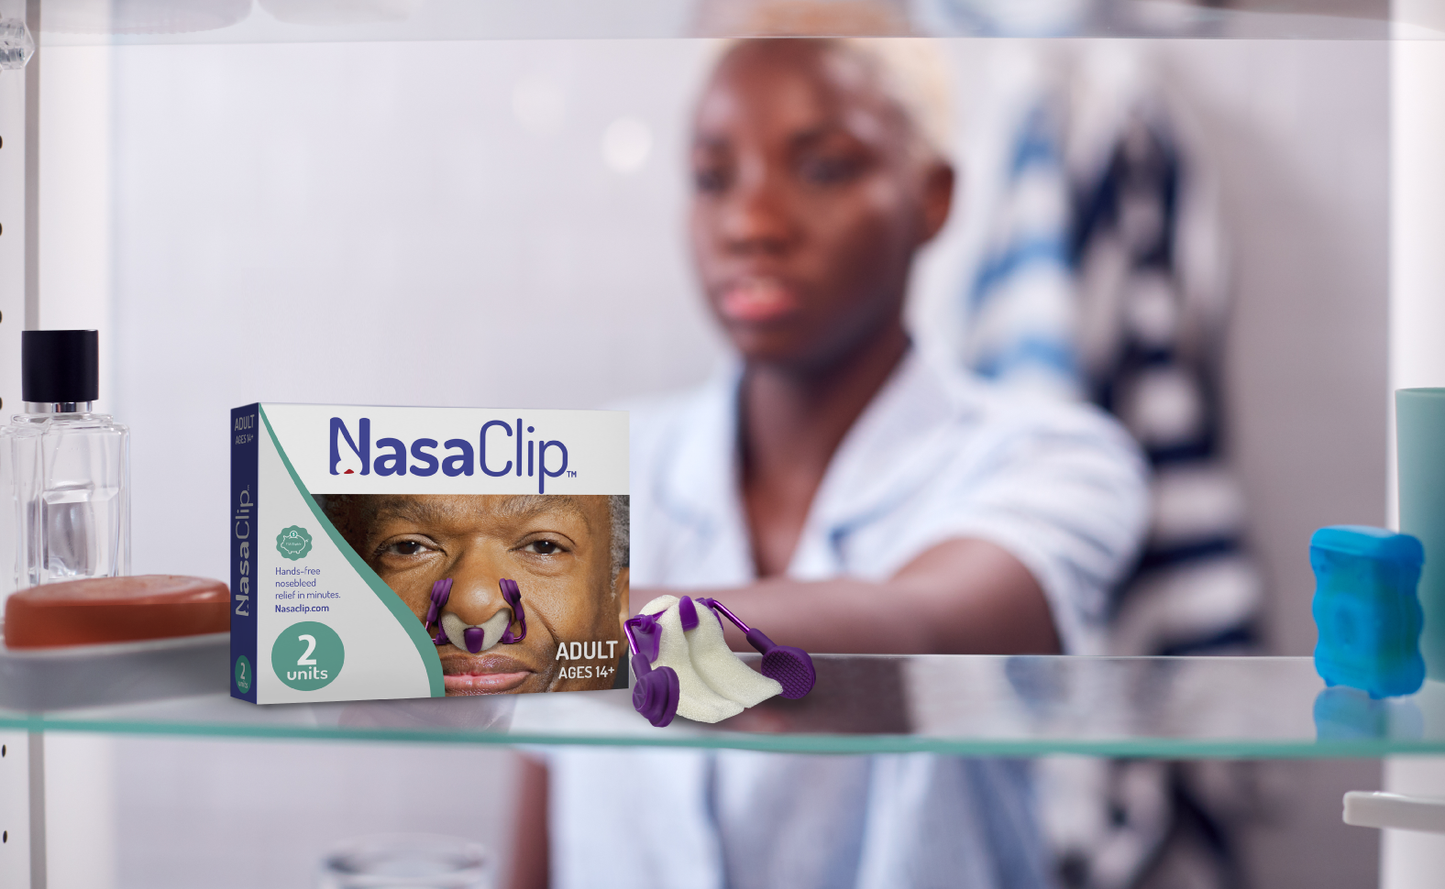 NasaClip :: Adults (Ages 14+)